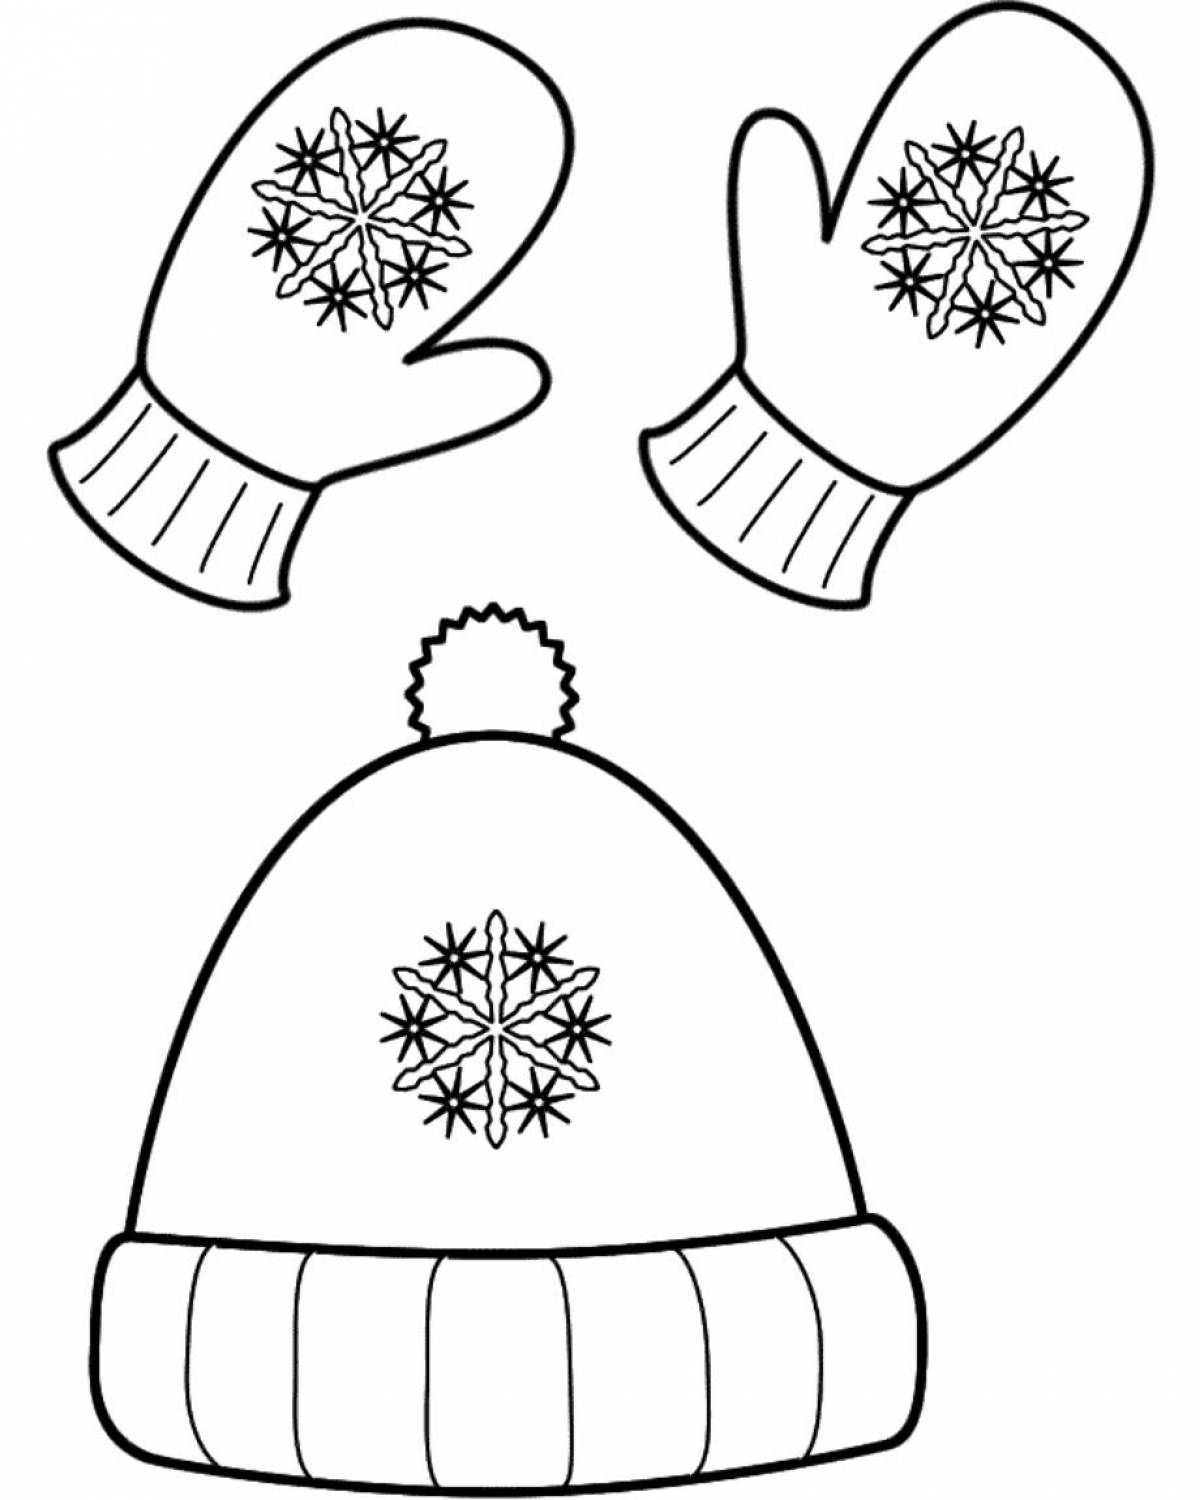 Live mitten-coloring for children 3-4 years old